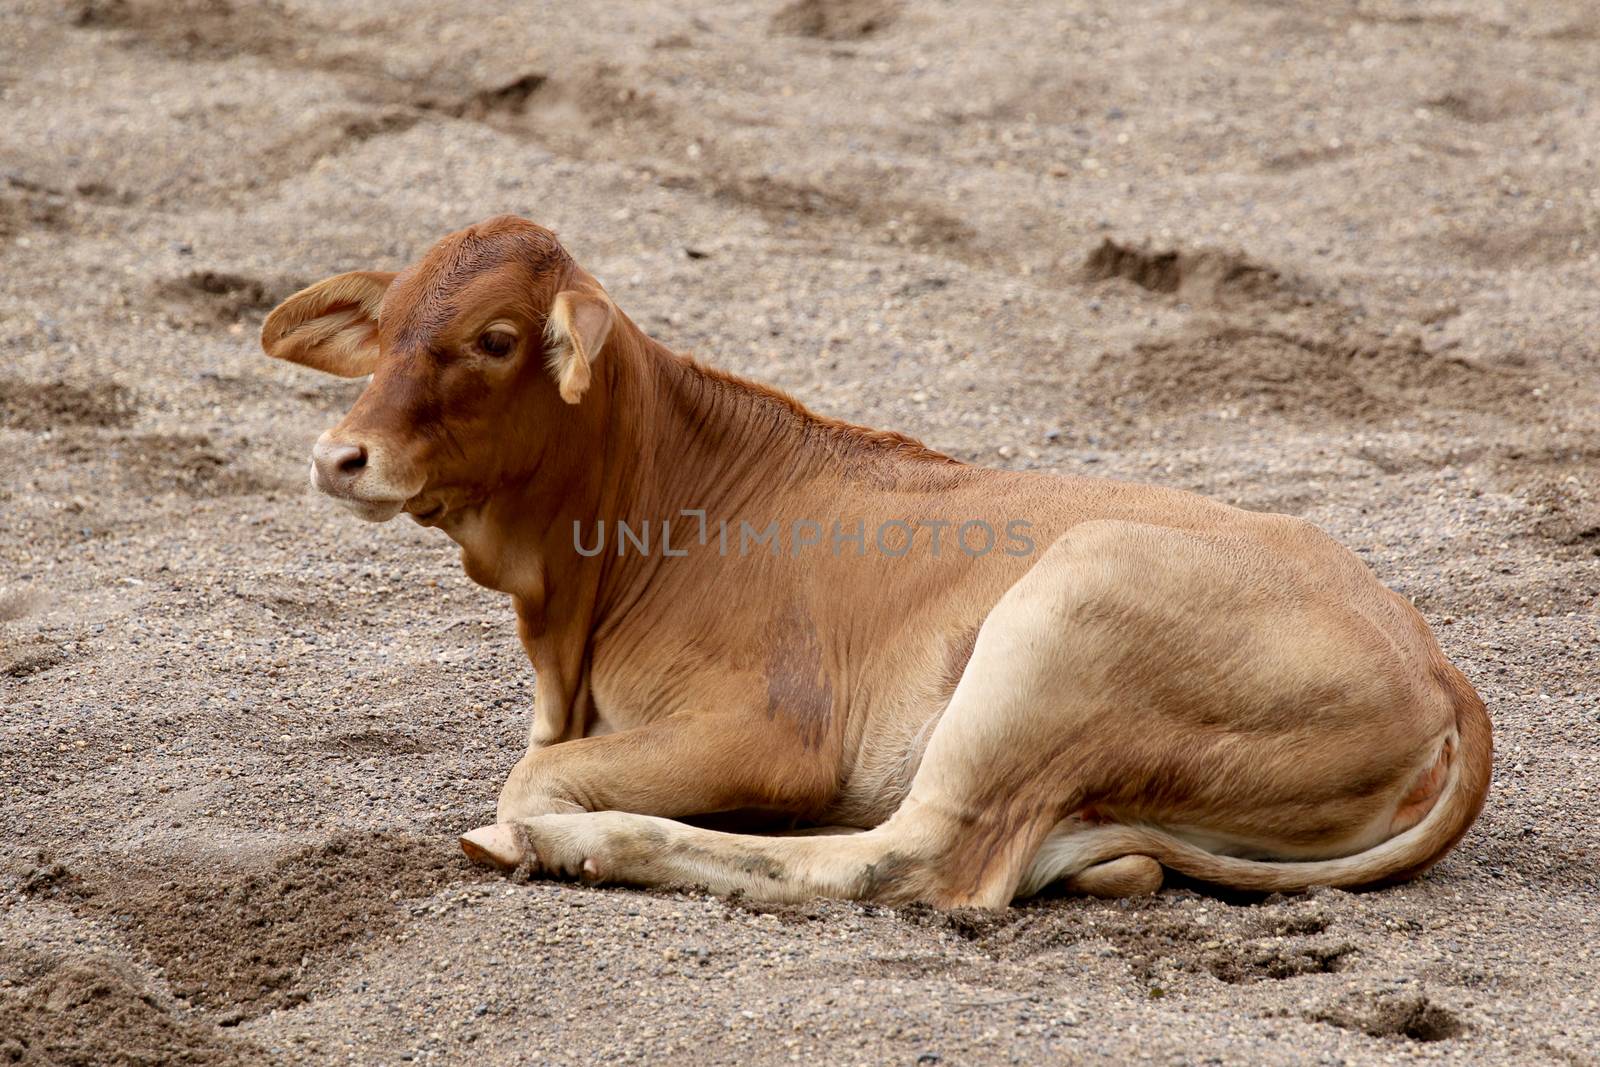 Image of a cow on sand background. by yod67